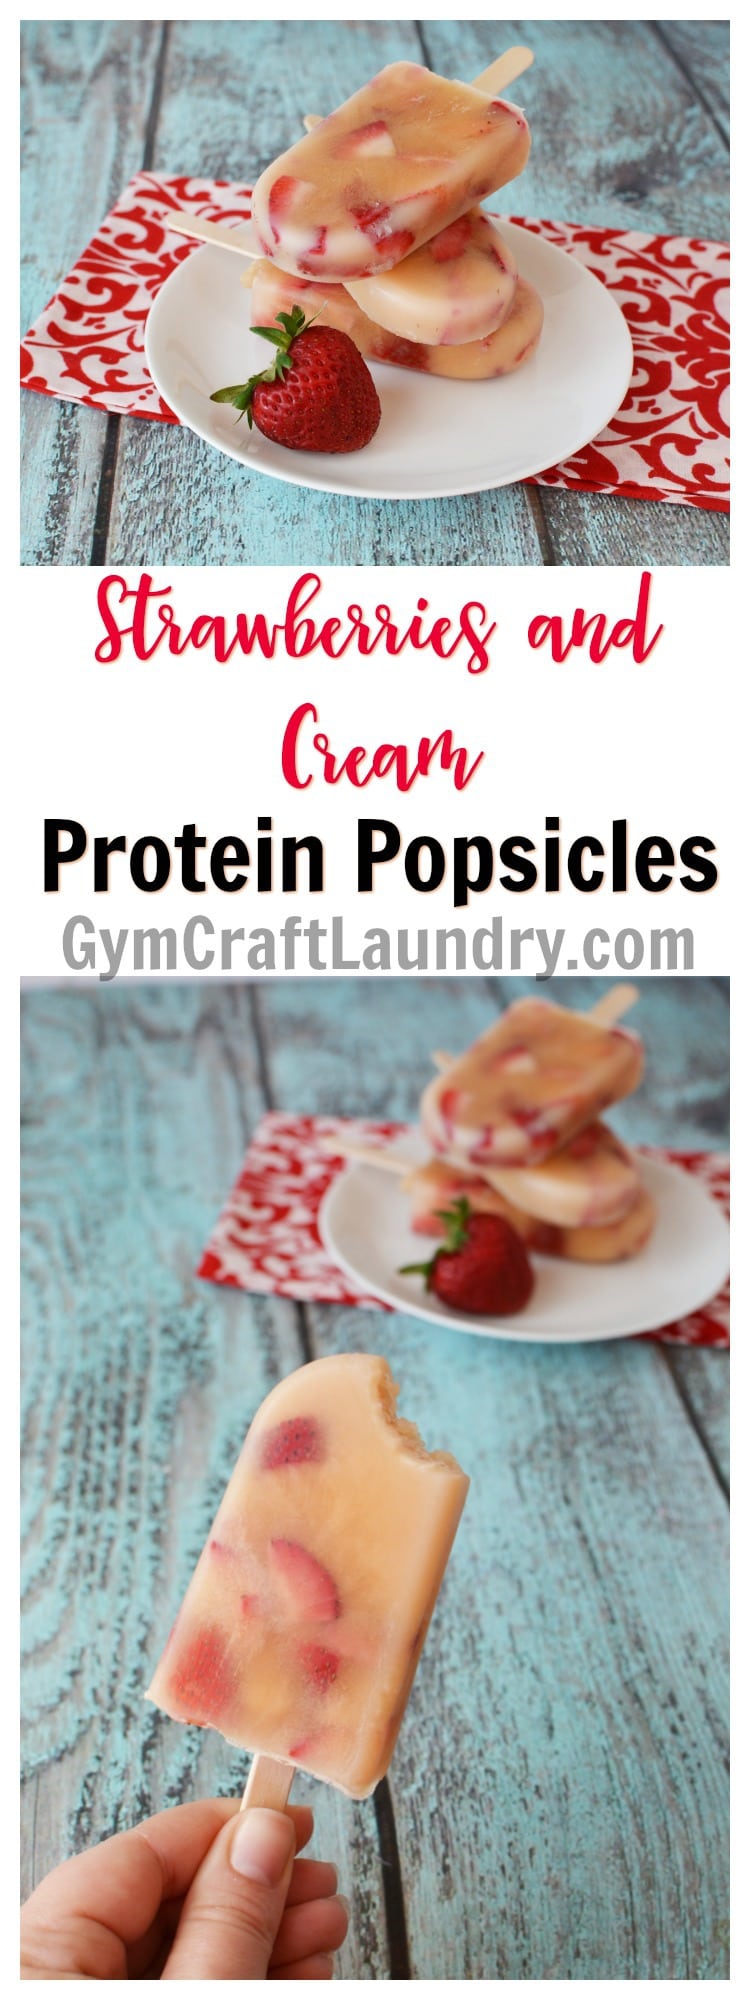 Strawberries and Cream Protein Popsicles